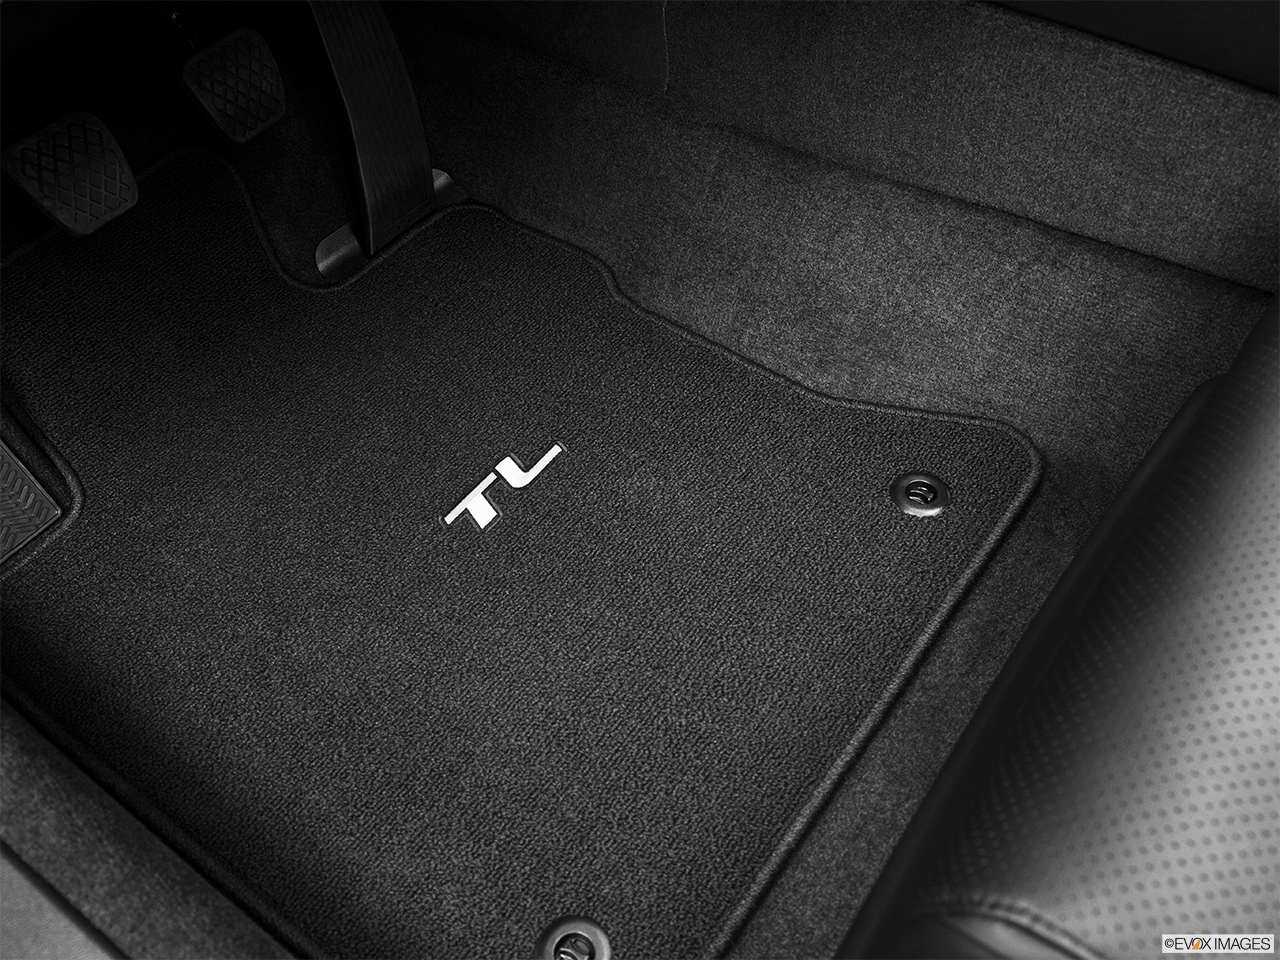 2013 Acura TL SH-AWD Driver's floor mat and pedals. Mid-seat level from outside looking in. 